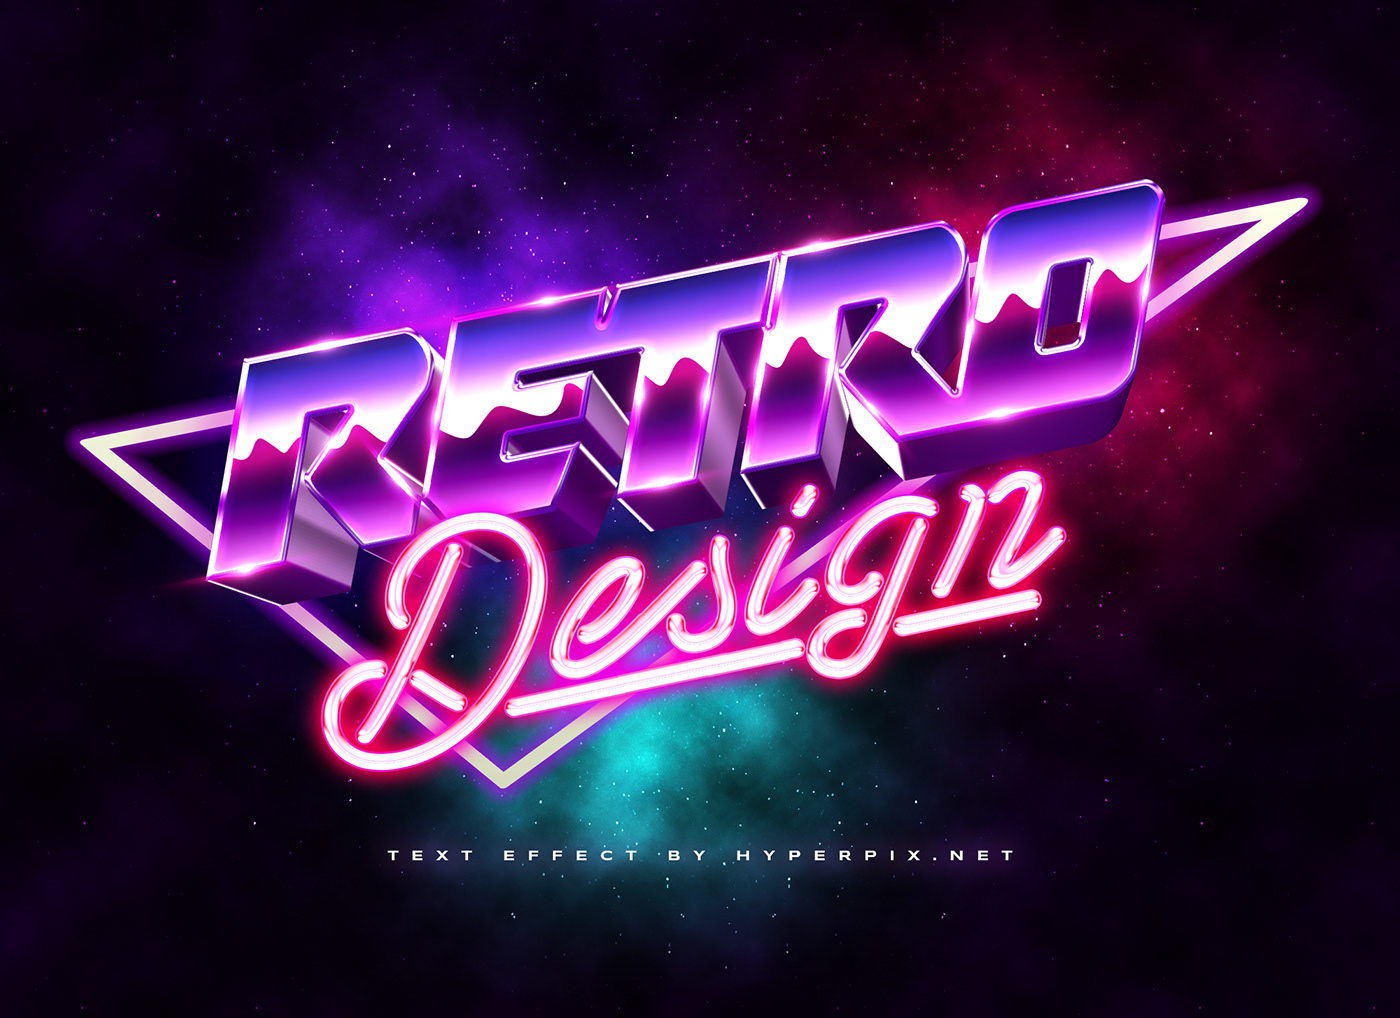 80s text effect Retro Mockup free freebie 1980s Synthwave vintage download